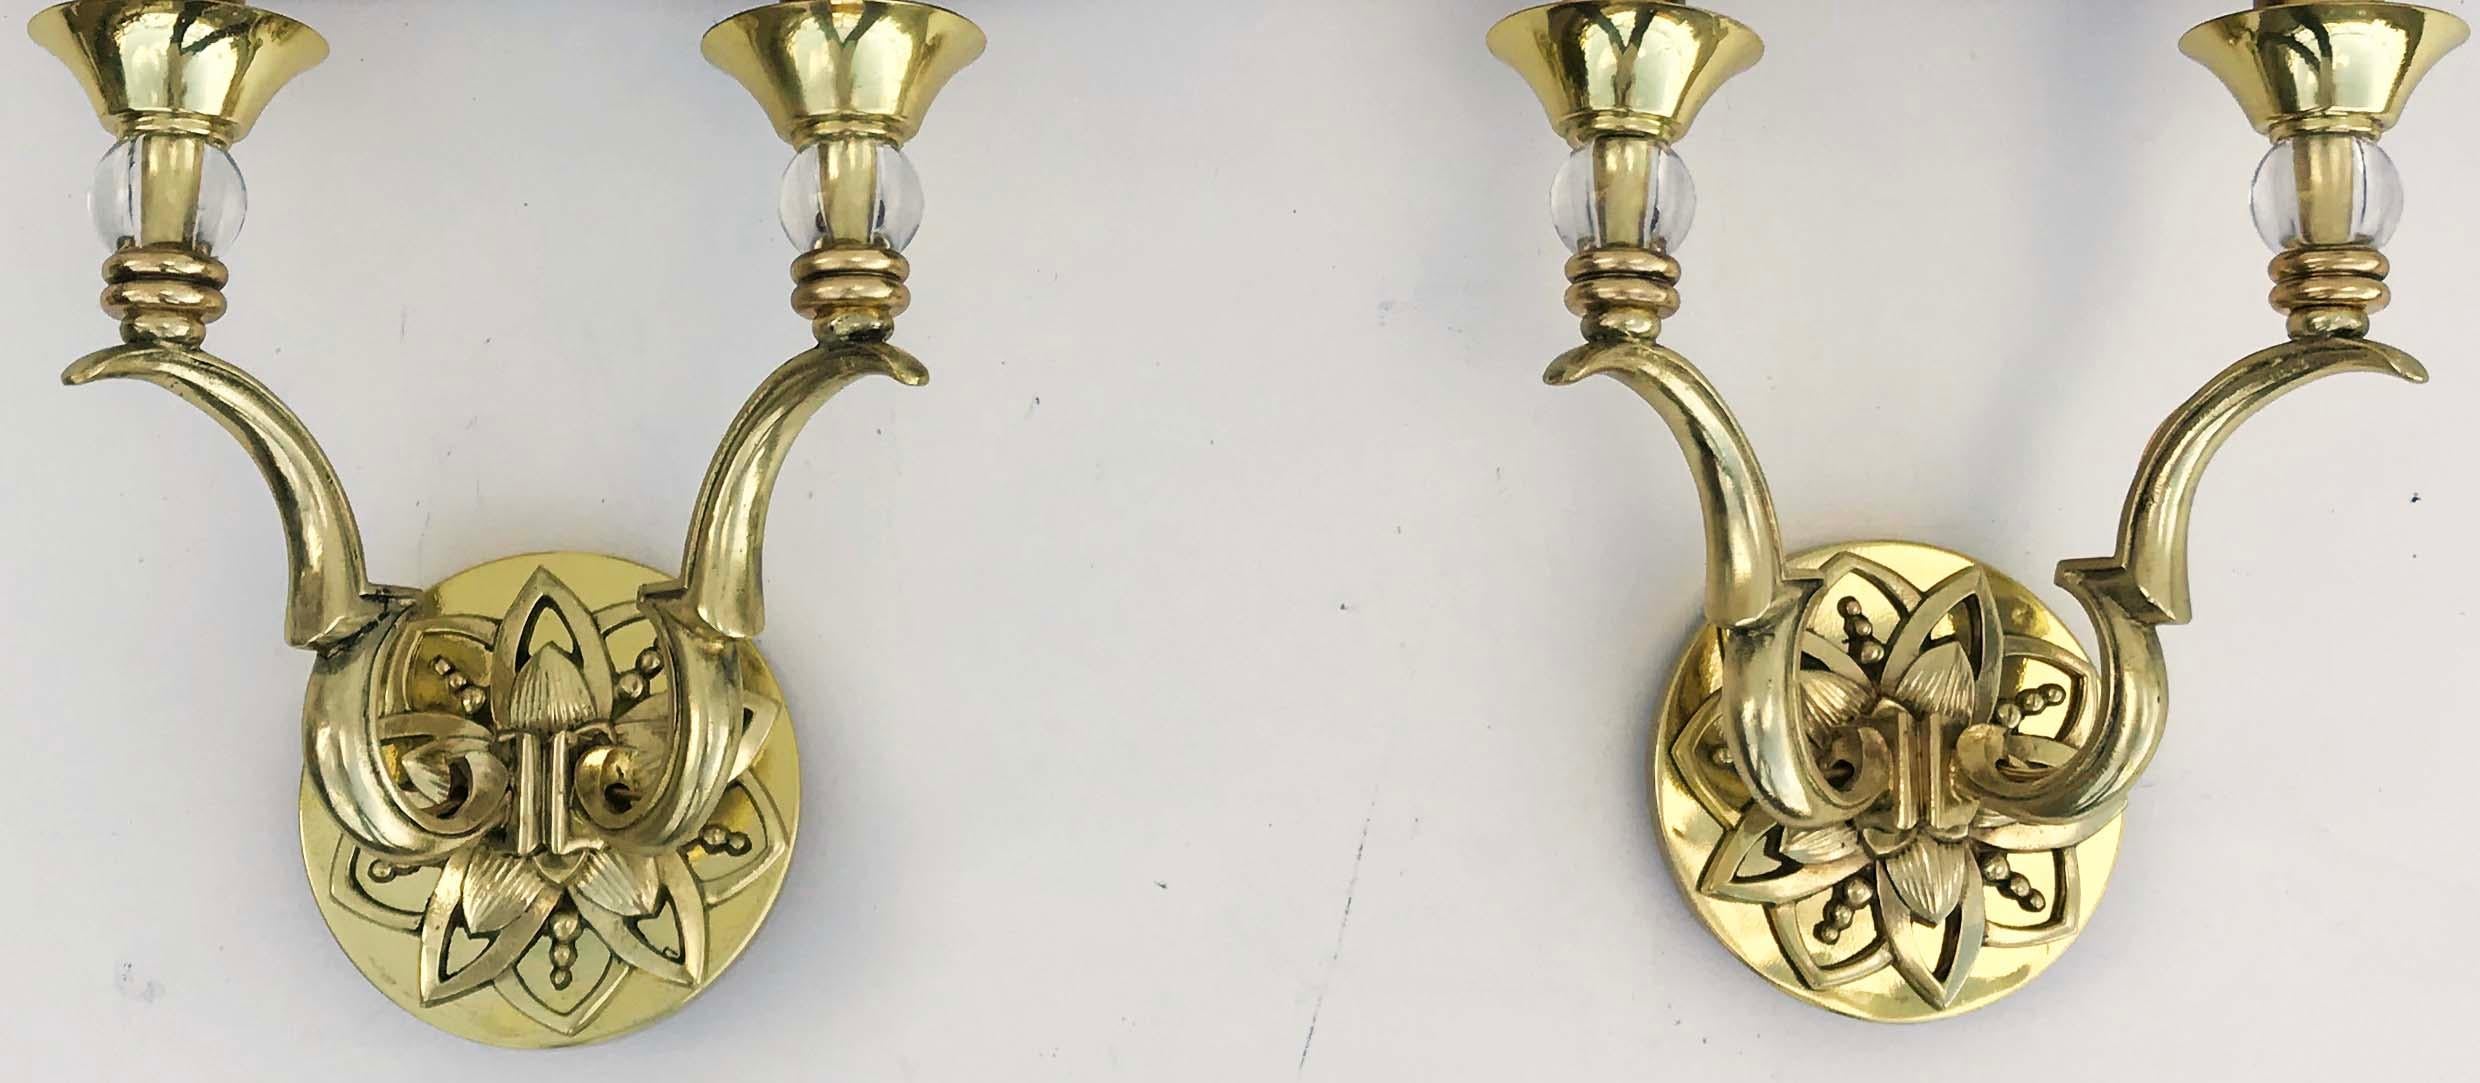 Superb pair of Maison Jansen sconces
2 lights , 40 watts max bulb
US rewired and in working condition 
Totally restored and refinished 
Back plate : 5